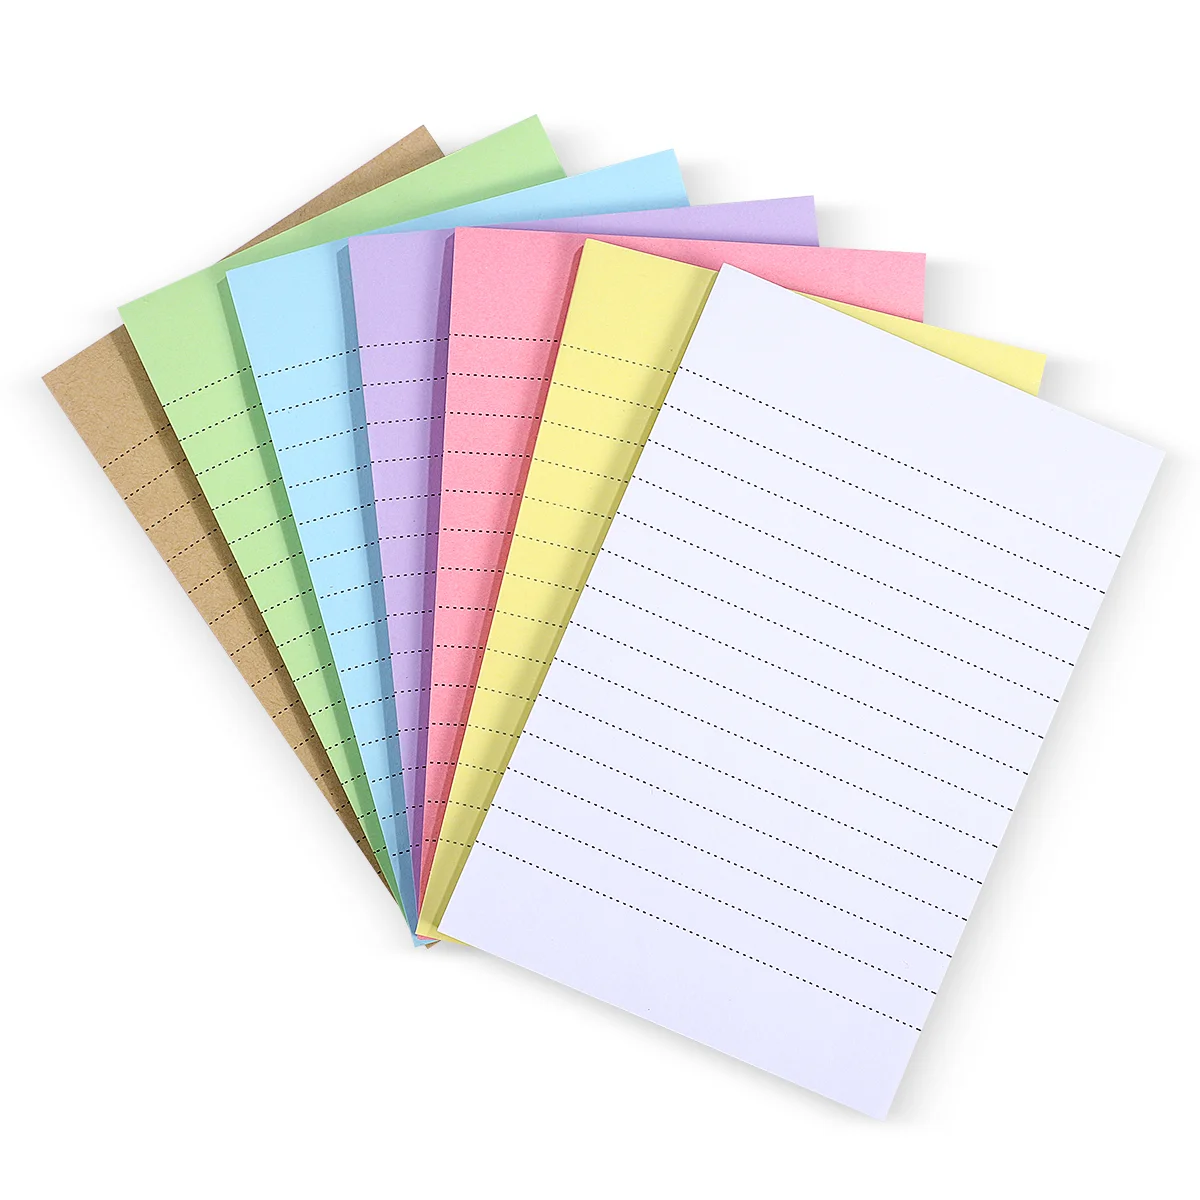 

Candy Color Self- Notes Pad Paper Memo Stickers Reminders Studying Notepads Students Stationery for Office School Home, 7Pcs